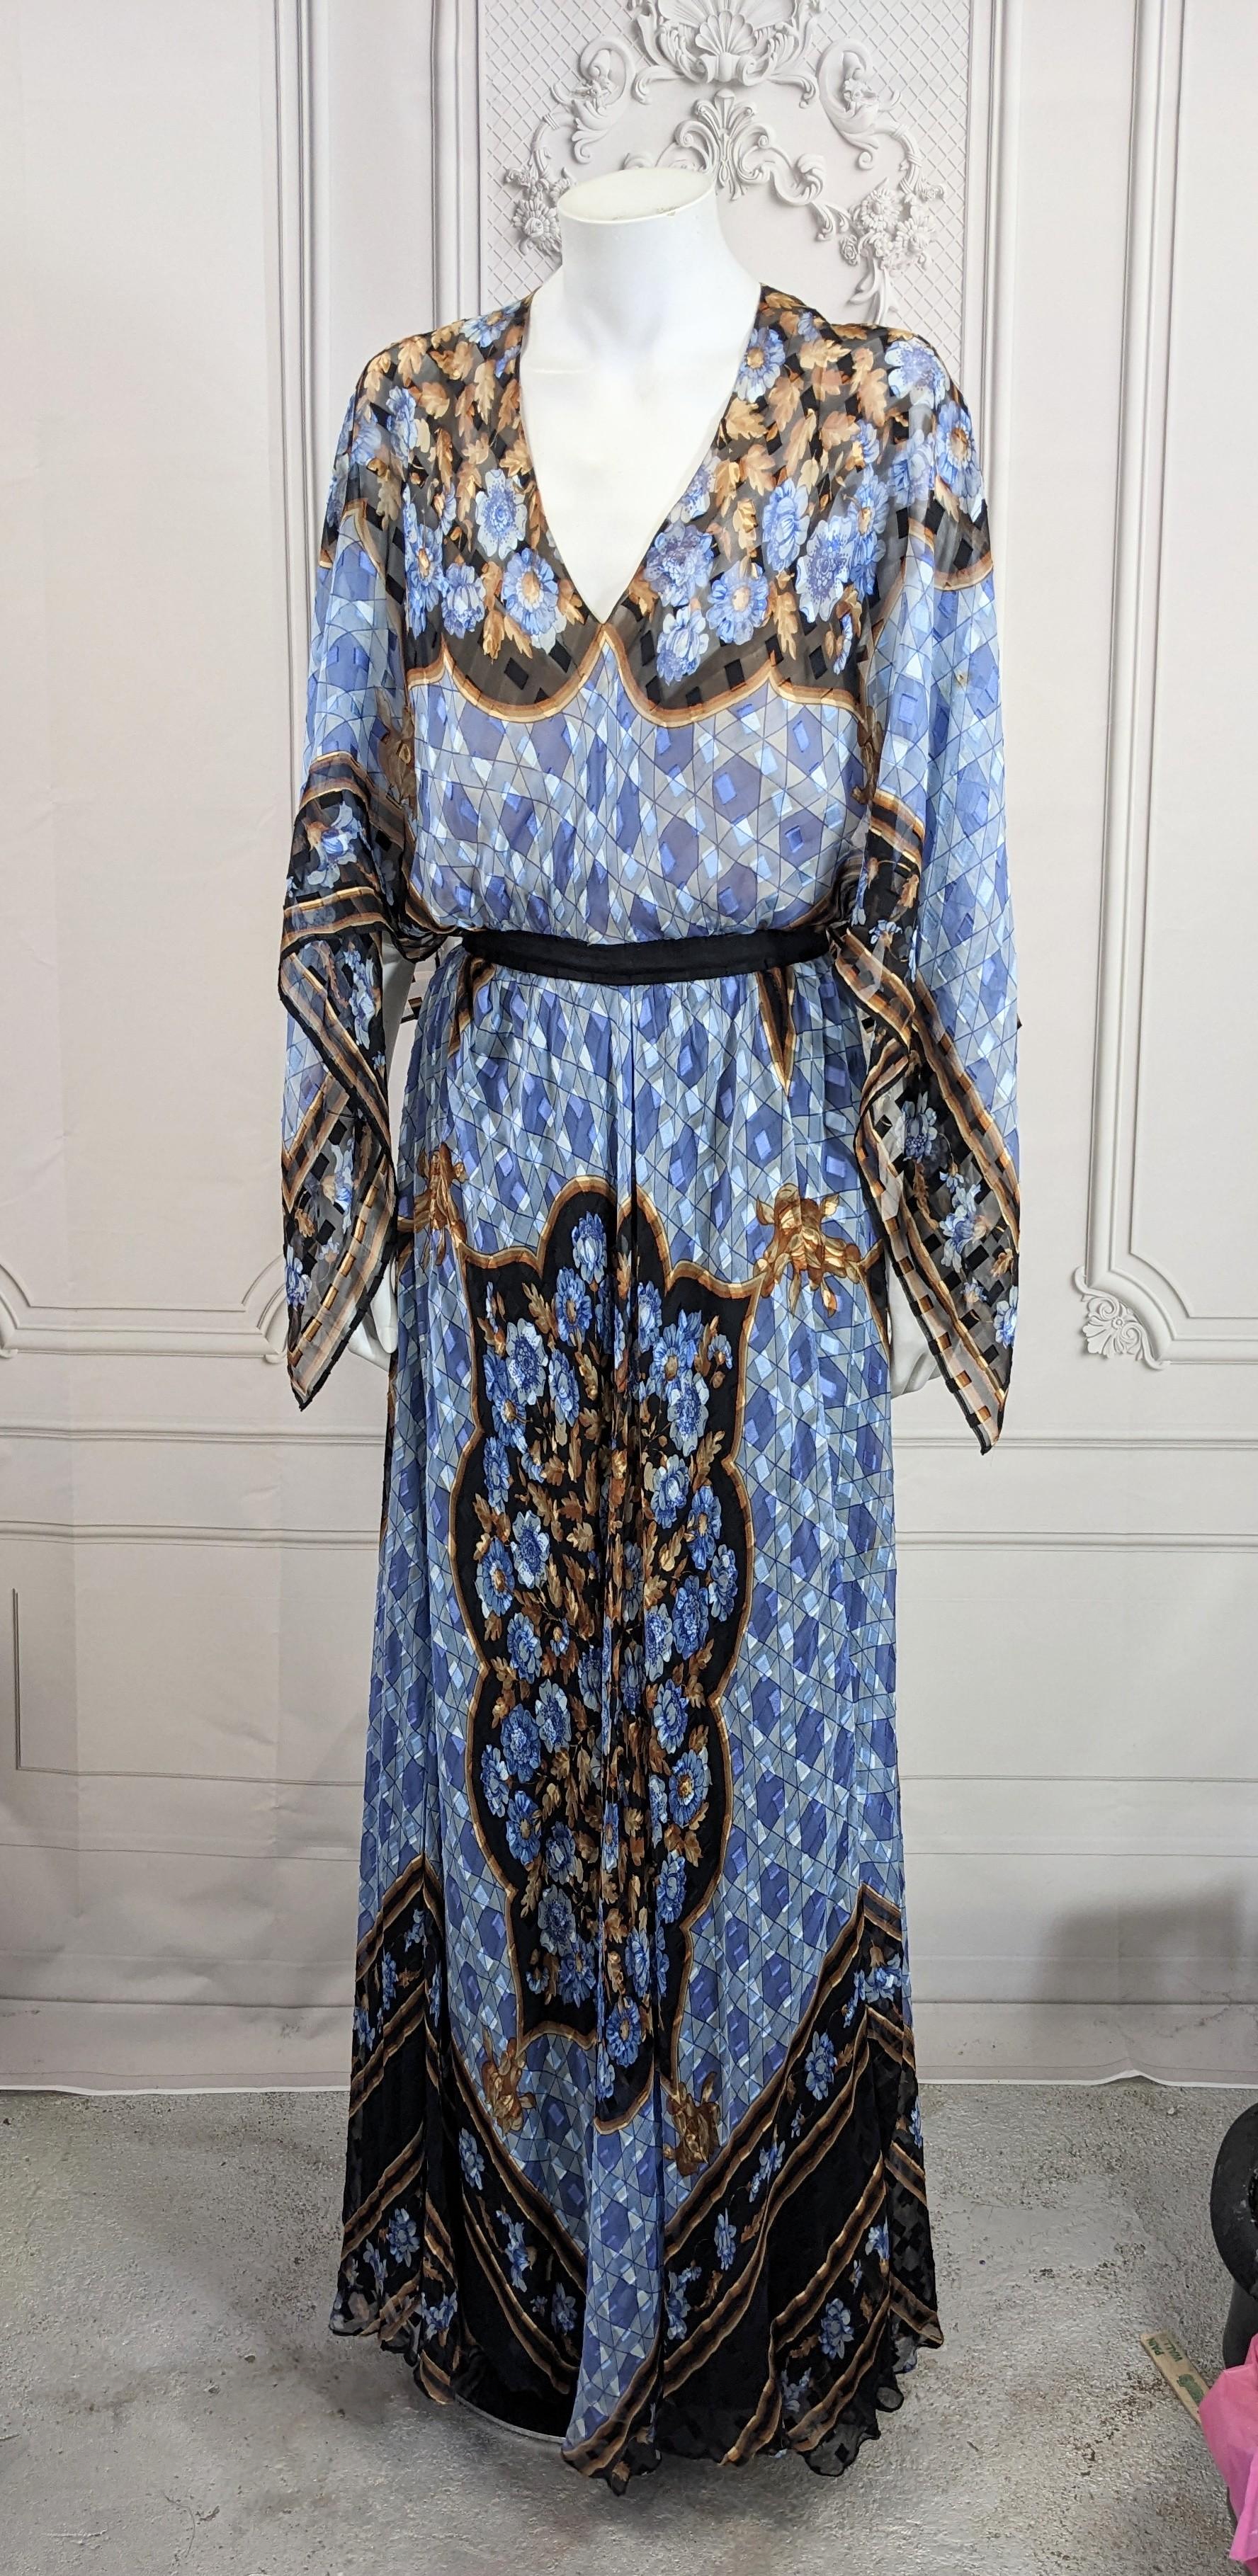 Elegant Paul Louis Orrier Placed Print Chiffon Scarf Point Gown from the 1970's, France. One piece silk chiffon gown with floral print on a Moorish ground, has a super full skirt attached to a nude liner bodice. A large scarf is attached at the